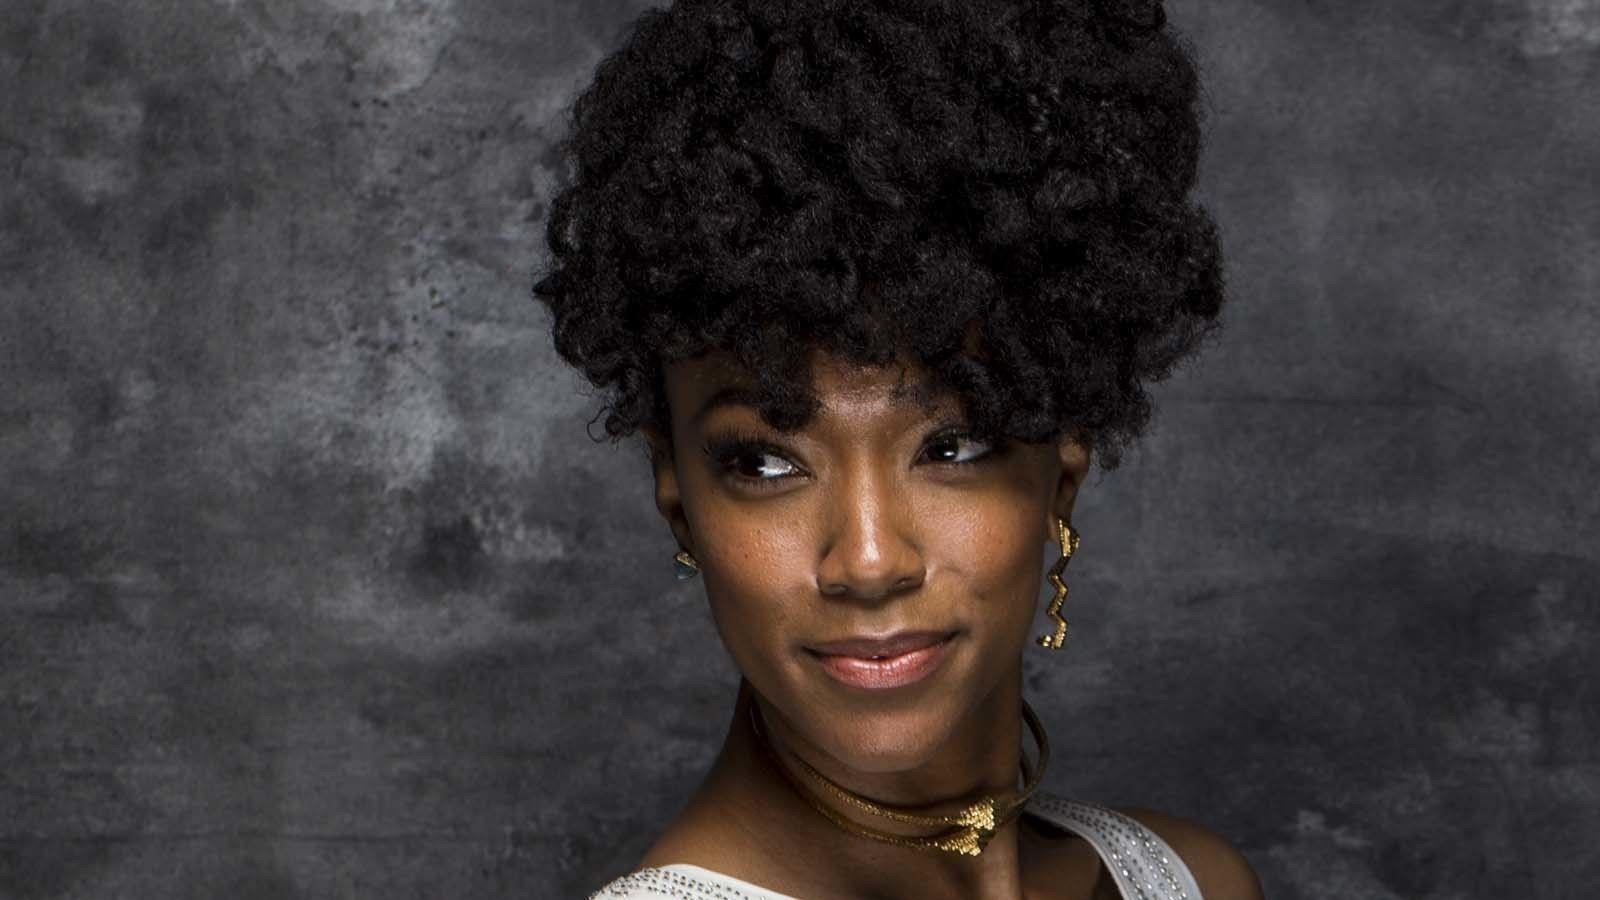 Star Trek: Discovery' Casts A New Lead, And Sonequa Martin Green Is